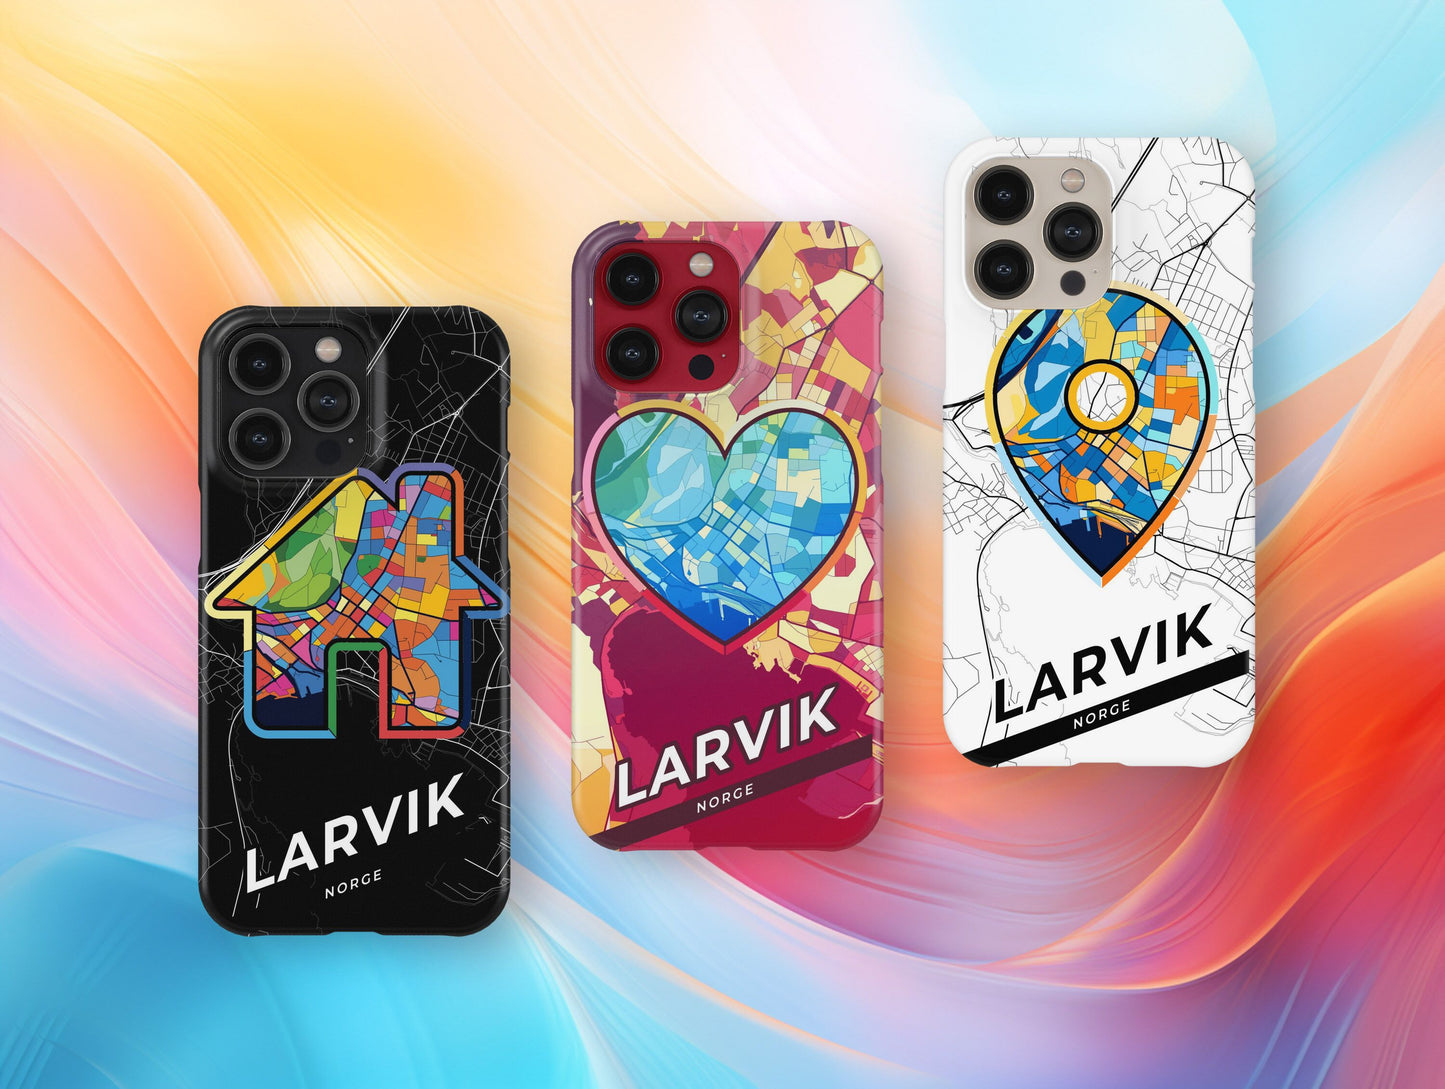 Larvik Norway slim phone case with colorful icon. Birthday, wedding or housewarming gift. Couple match cases.